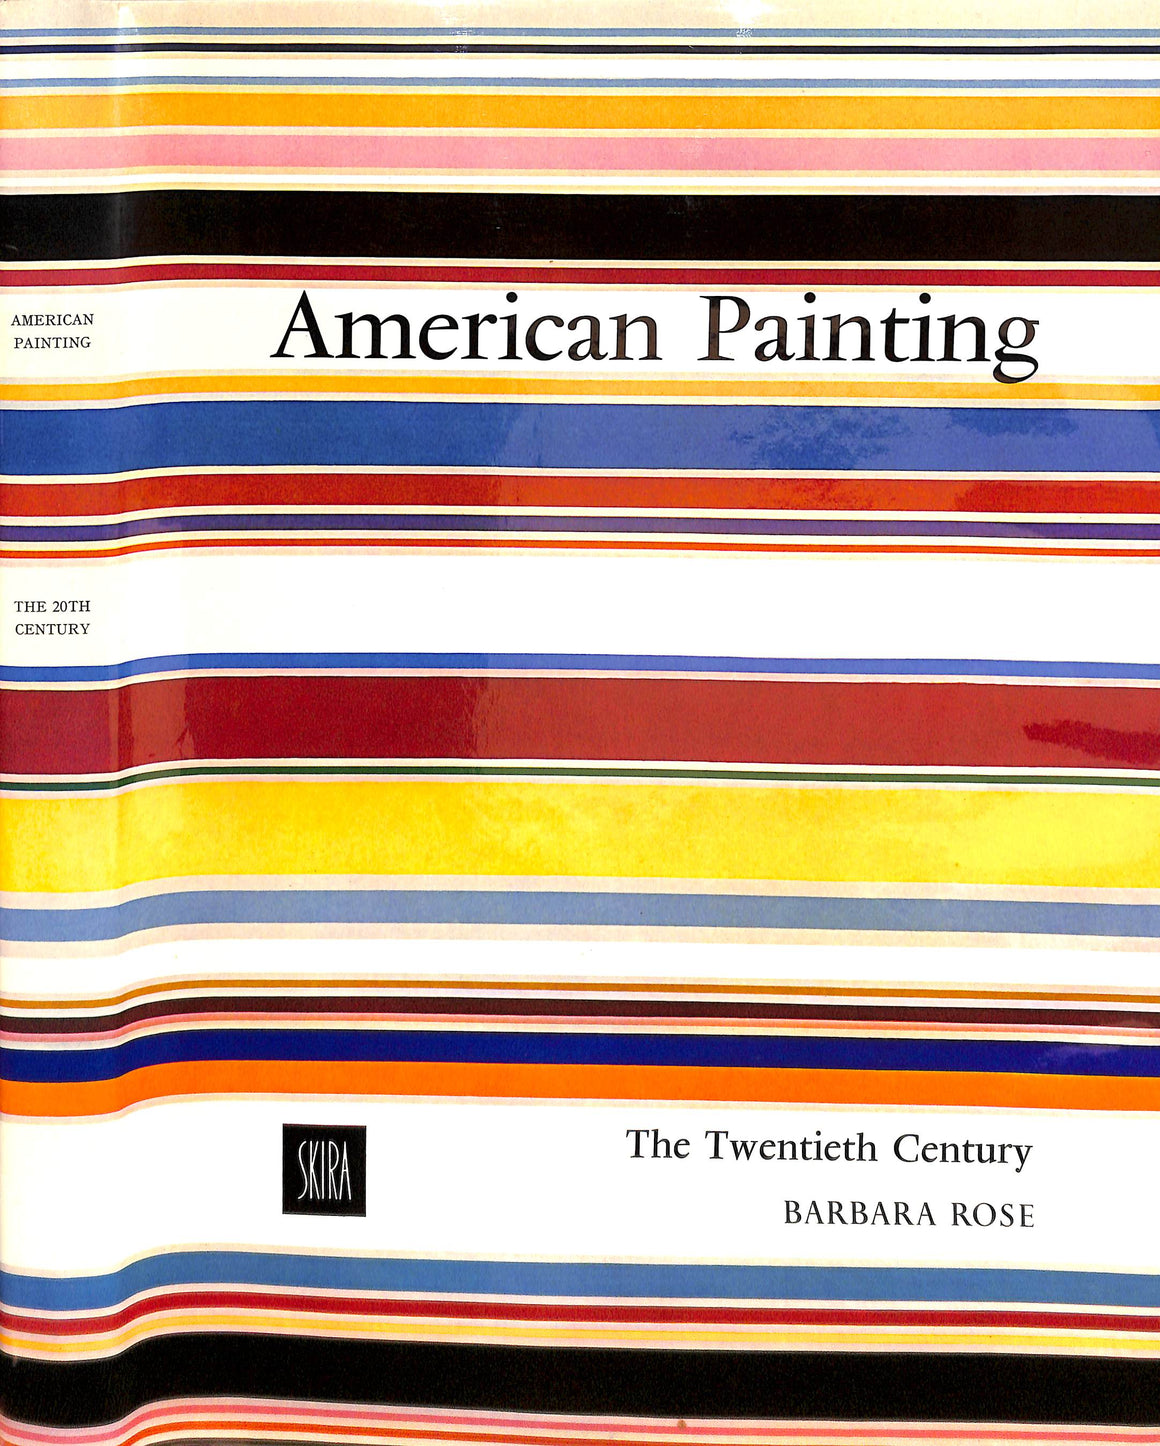 "American Painting From Its Beginnings To The Armory Show & The Twentieth Century" PROWN, Jules David & ROSE, Barbara [text by]